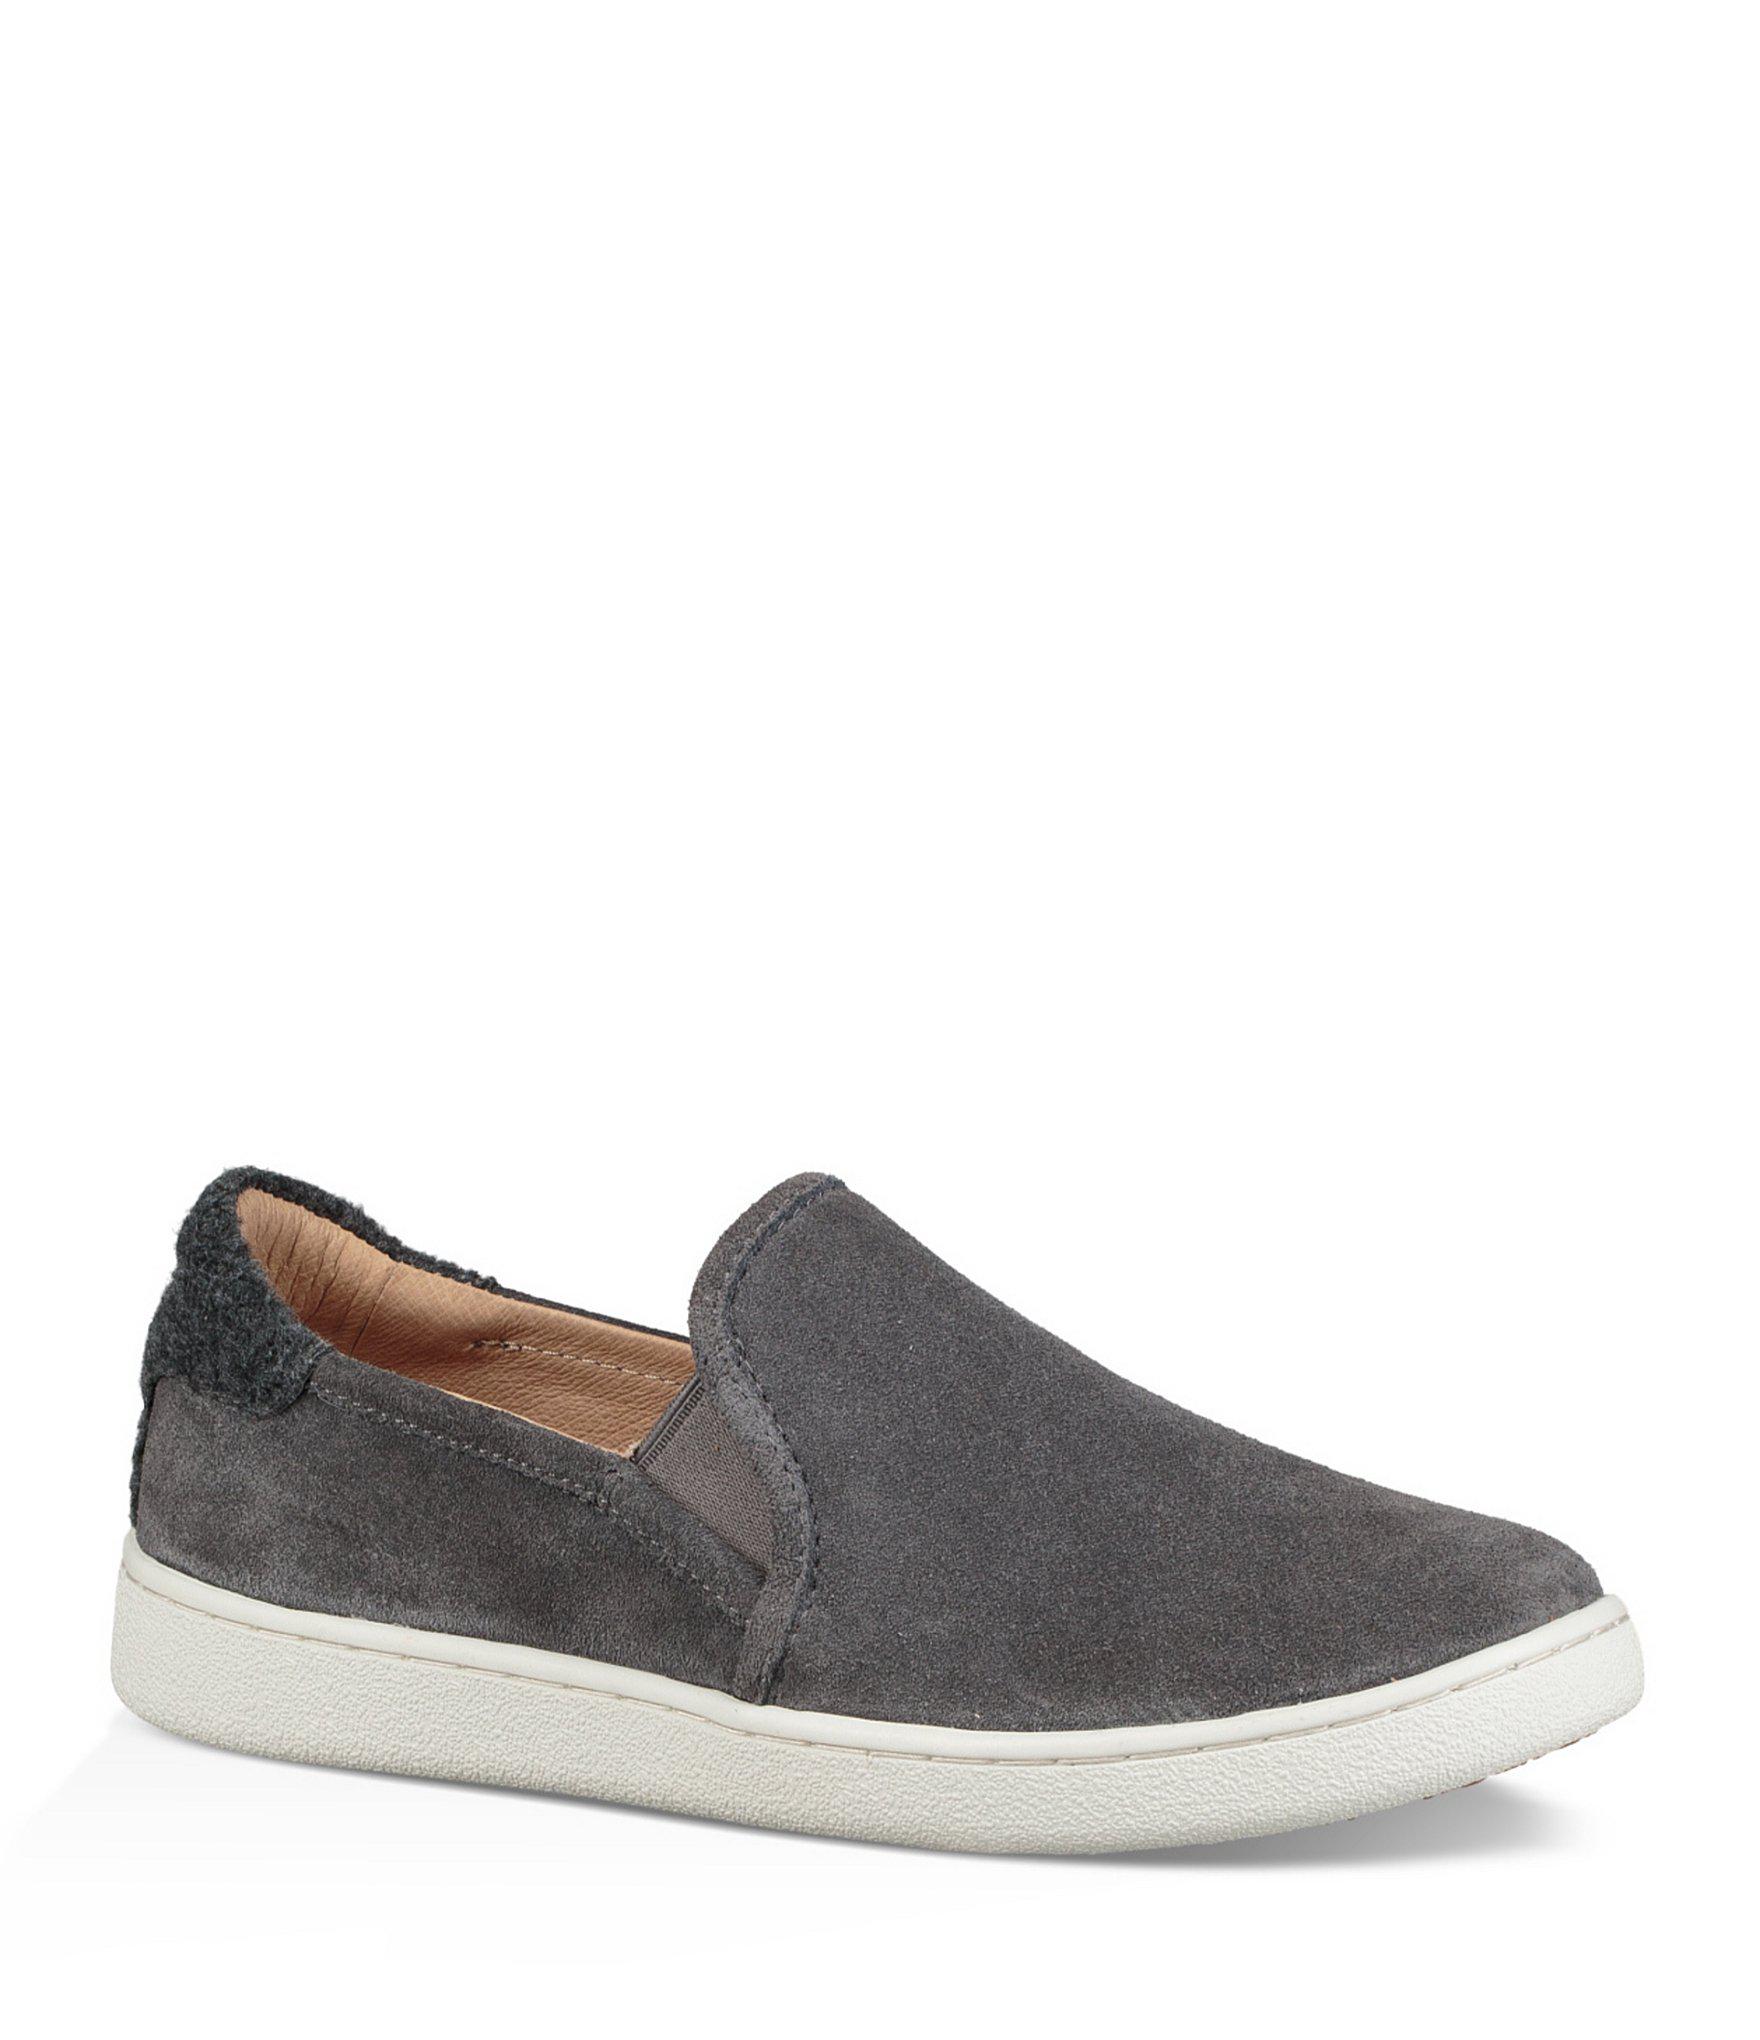 UGG Cas Suede Slip On Sneakers in Charcoal (Gray) - Lyst